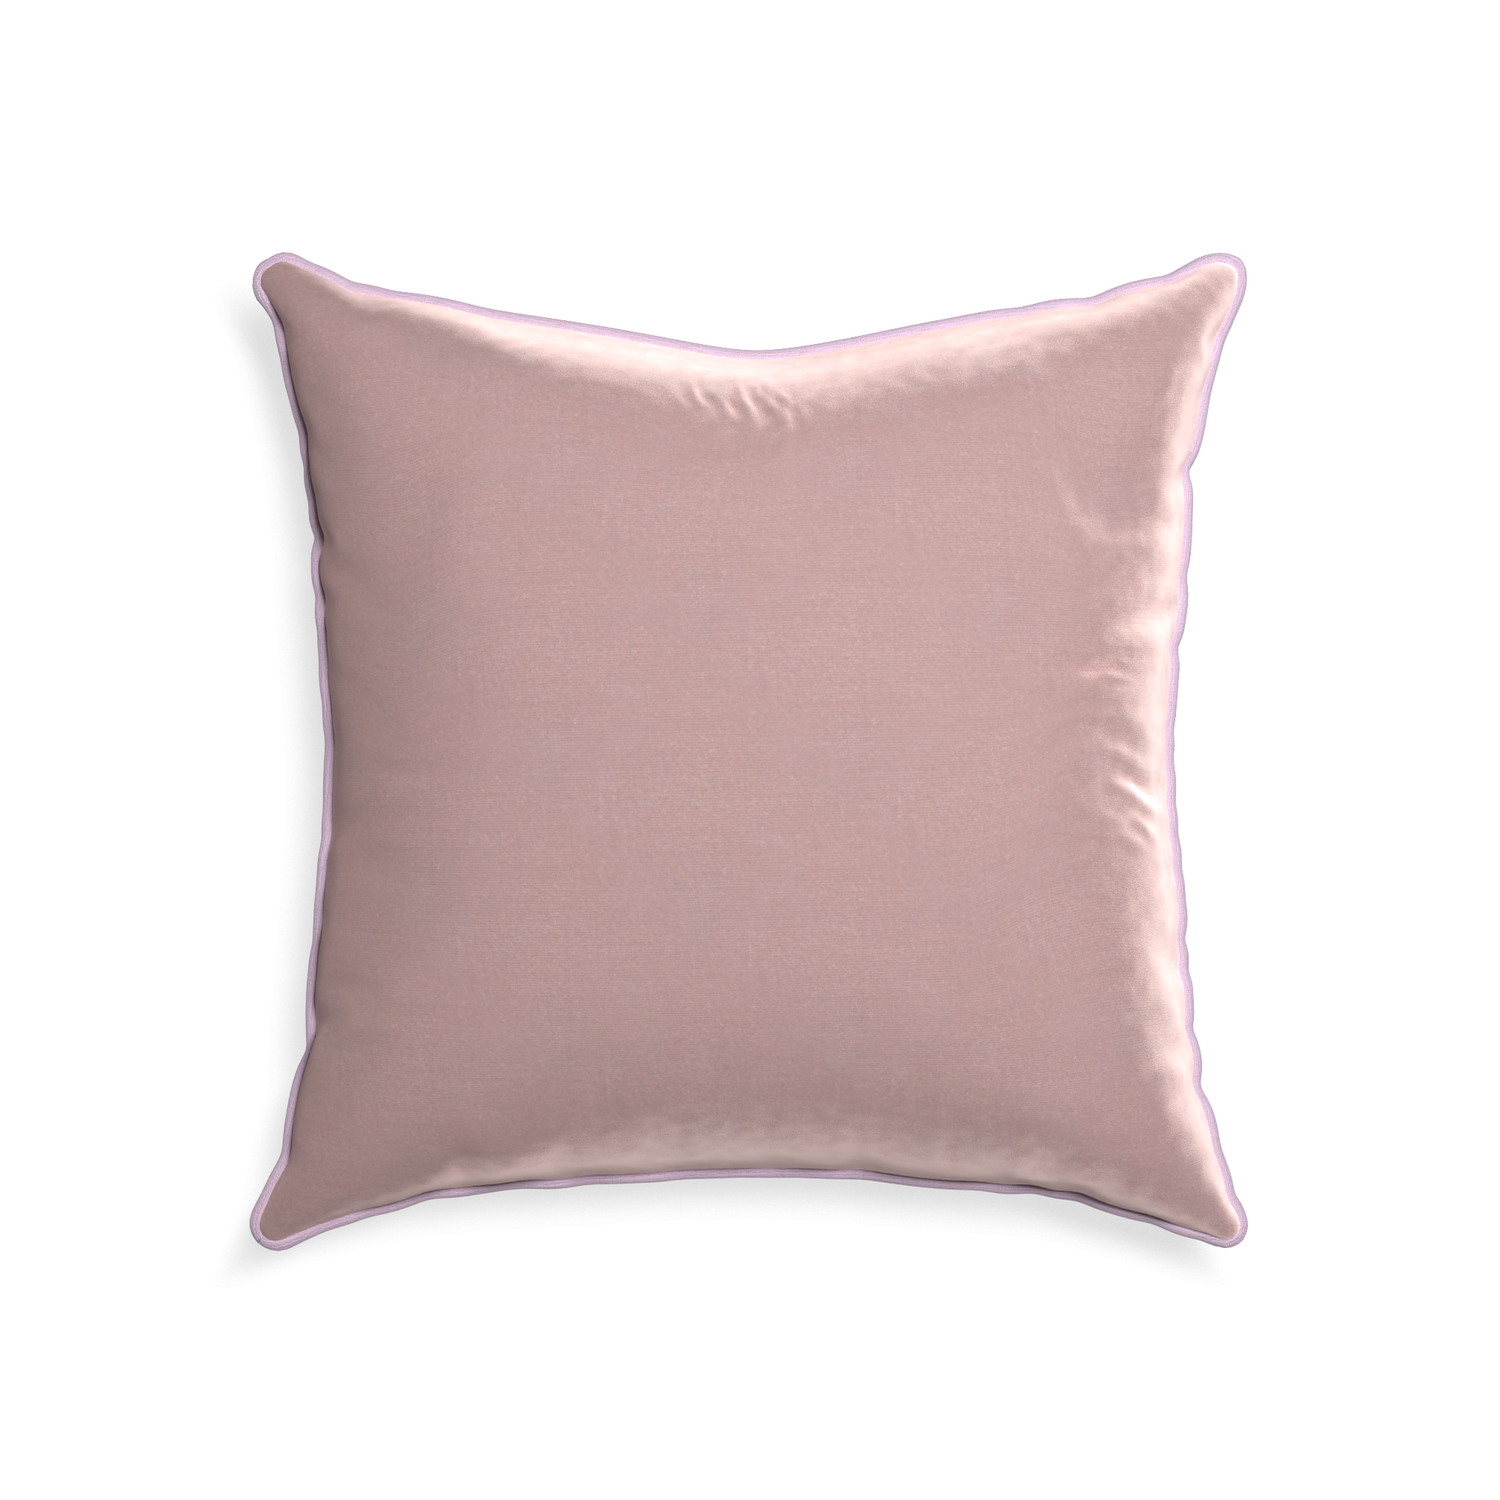 22-square mauve velvet custom pillow with l piping on white background